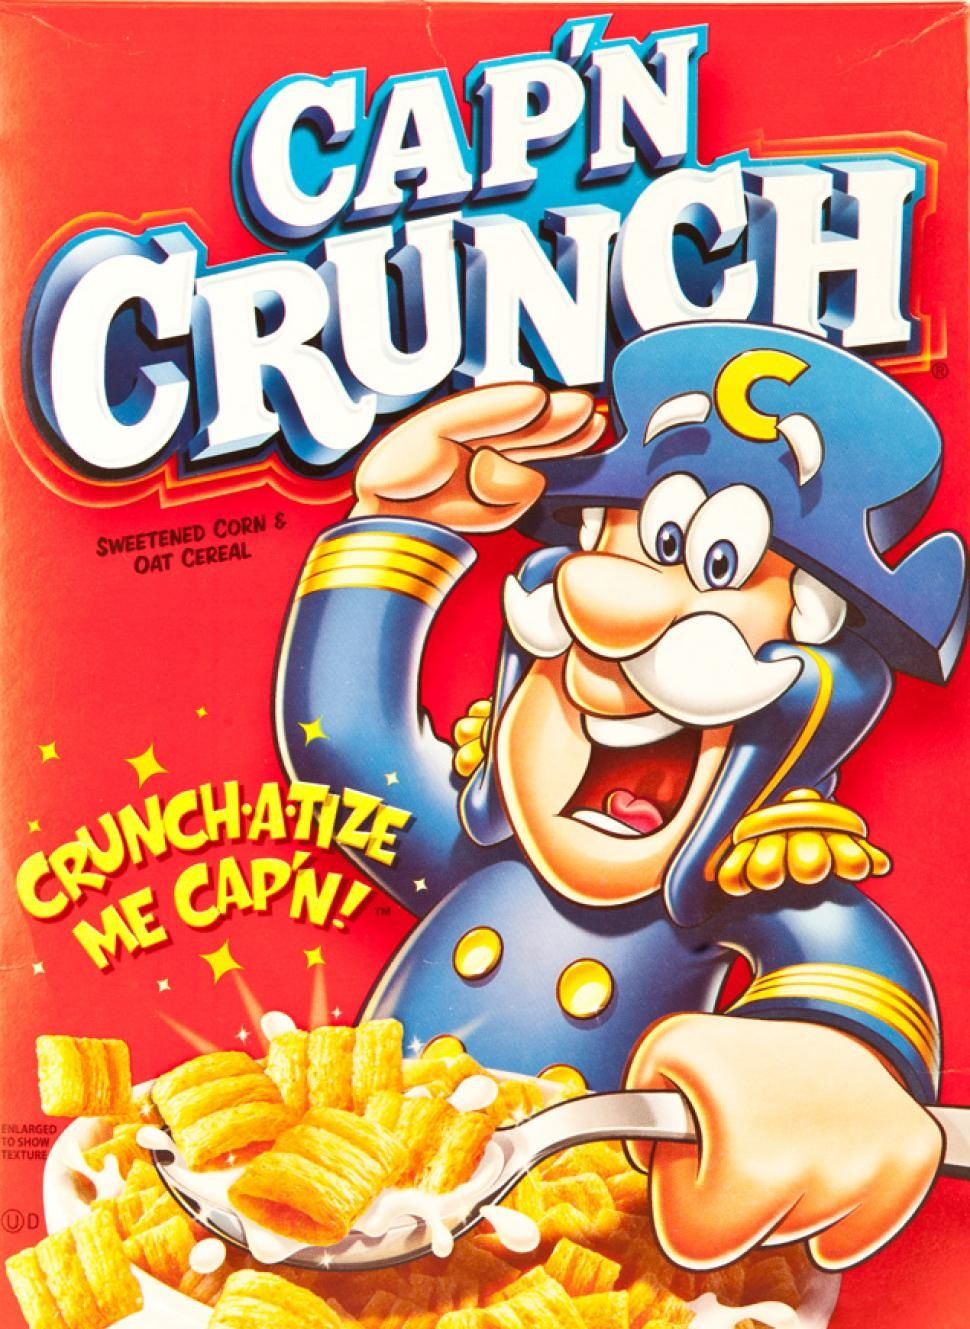 Captain Crunch and Emperor Palpatine run the gauntlet